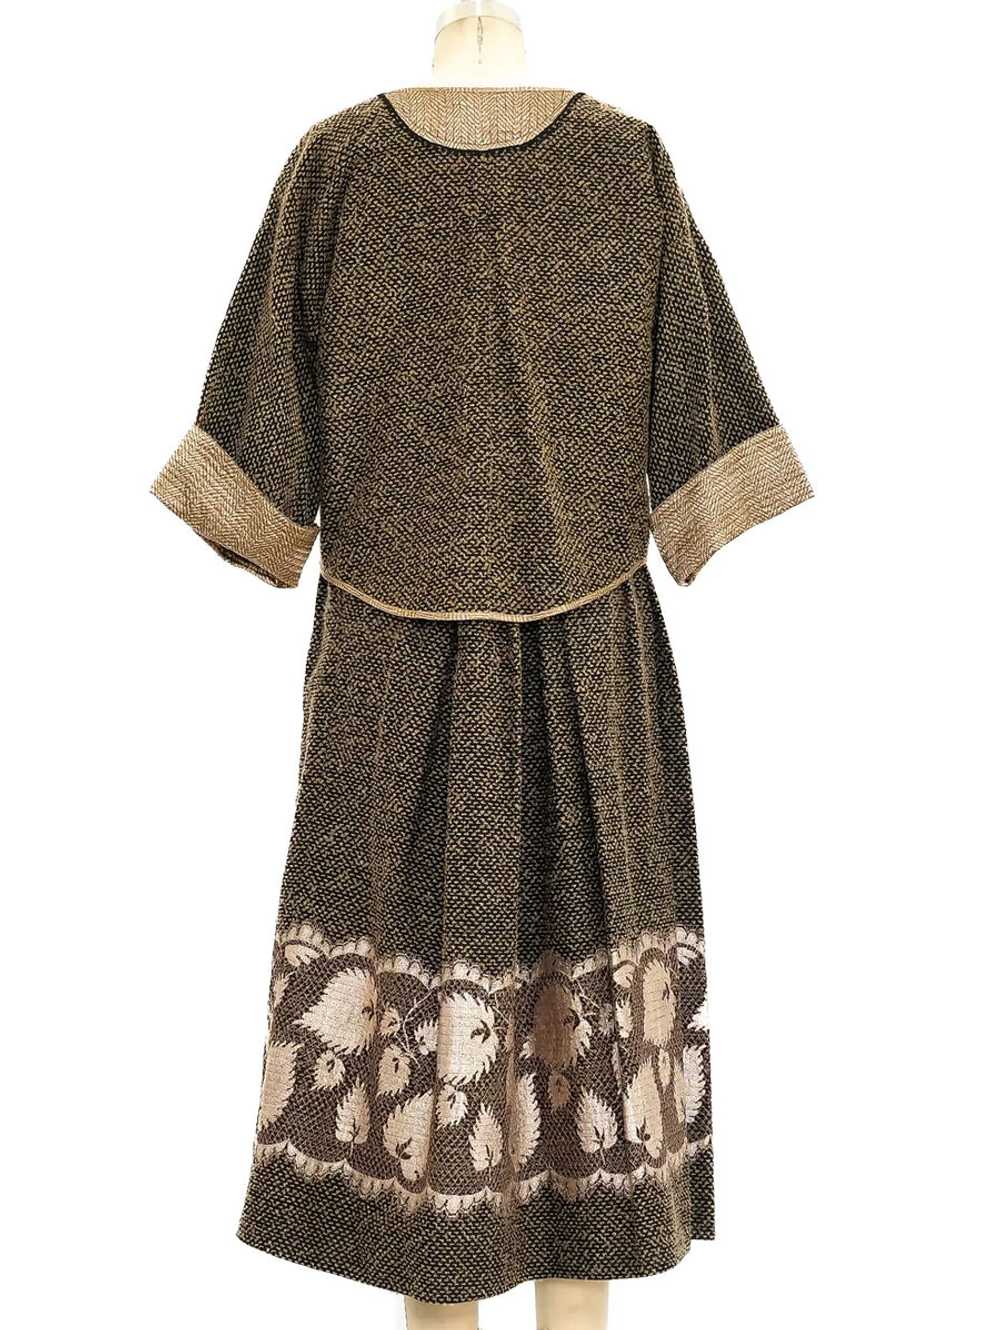 Geoffrey Beene Tweed and Lace Skirt Ensemble - image 5